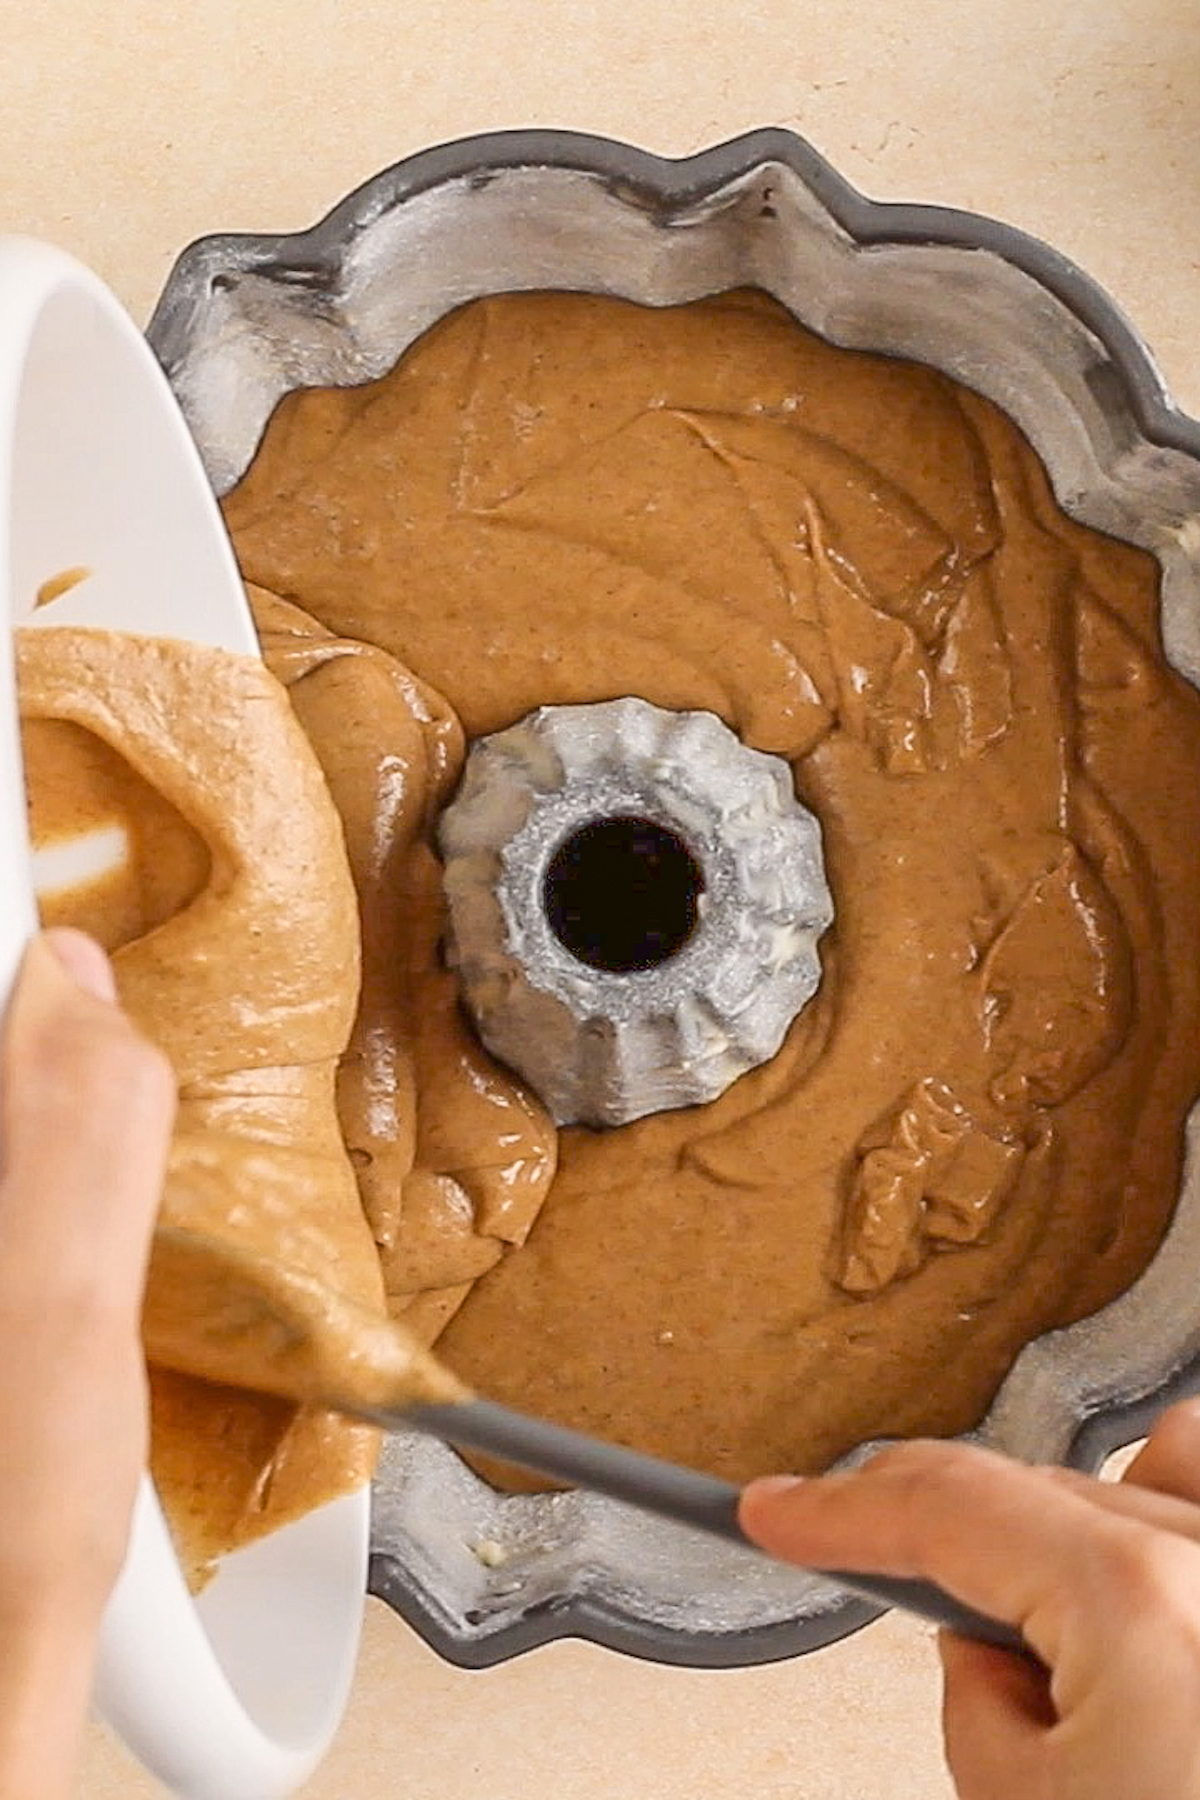 Cake batter being poured into a Bundt pan.